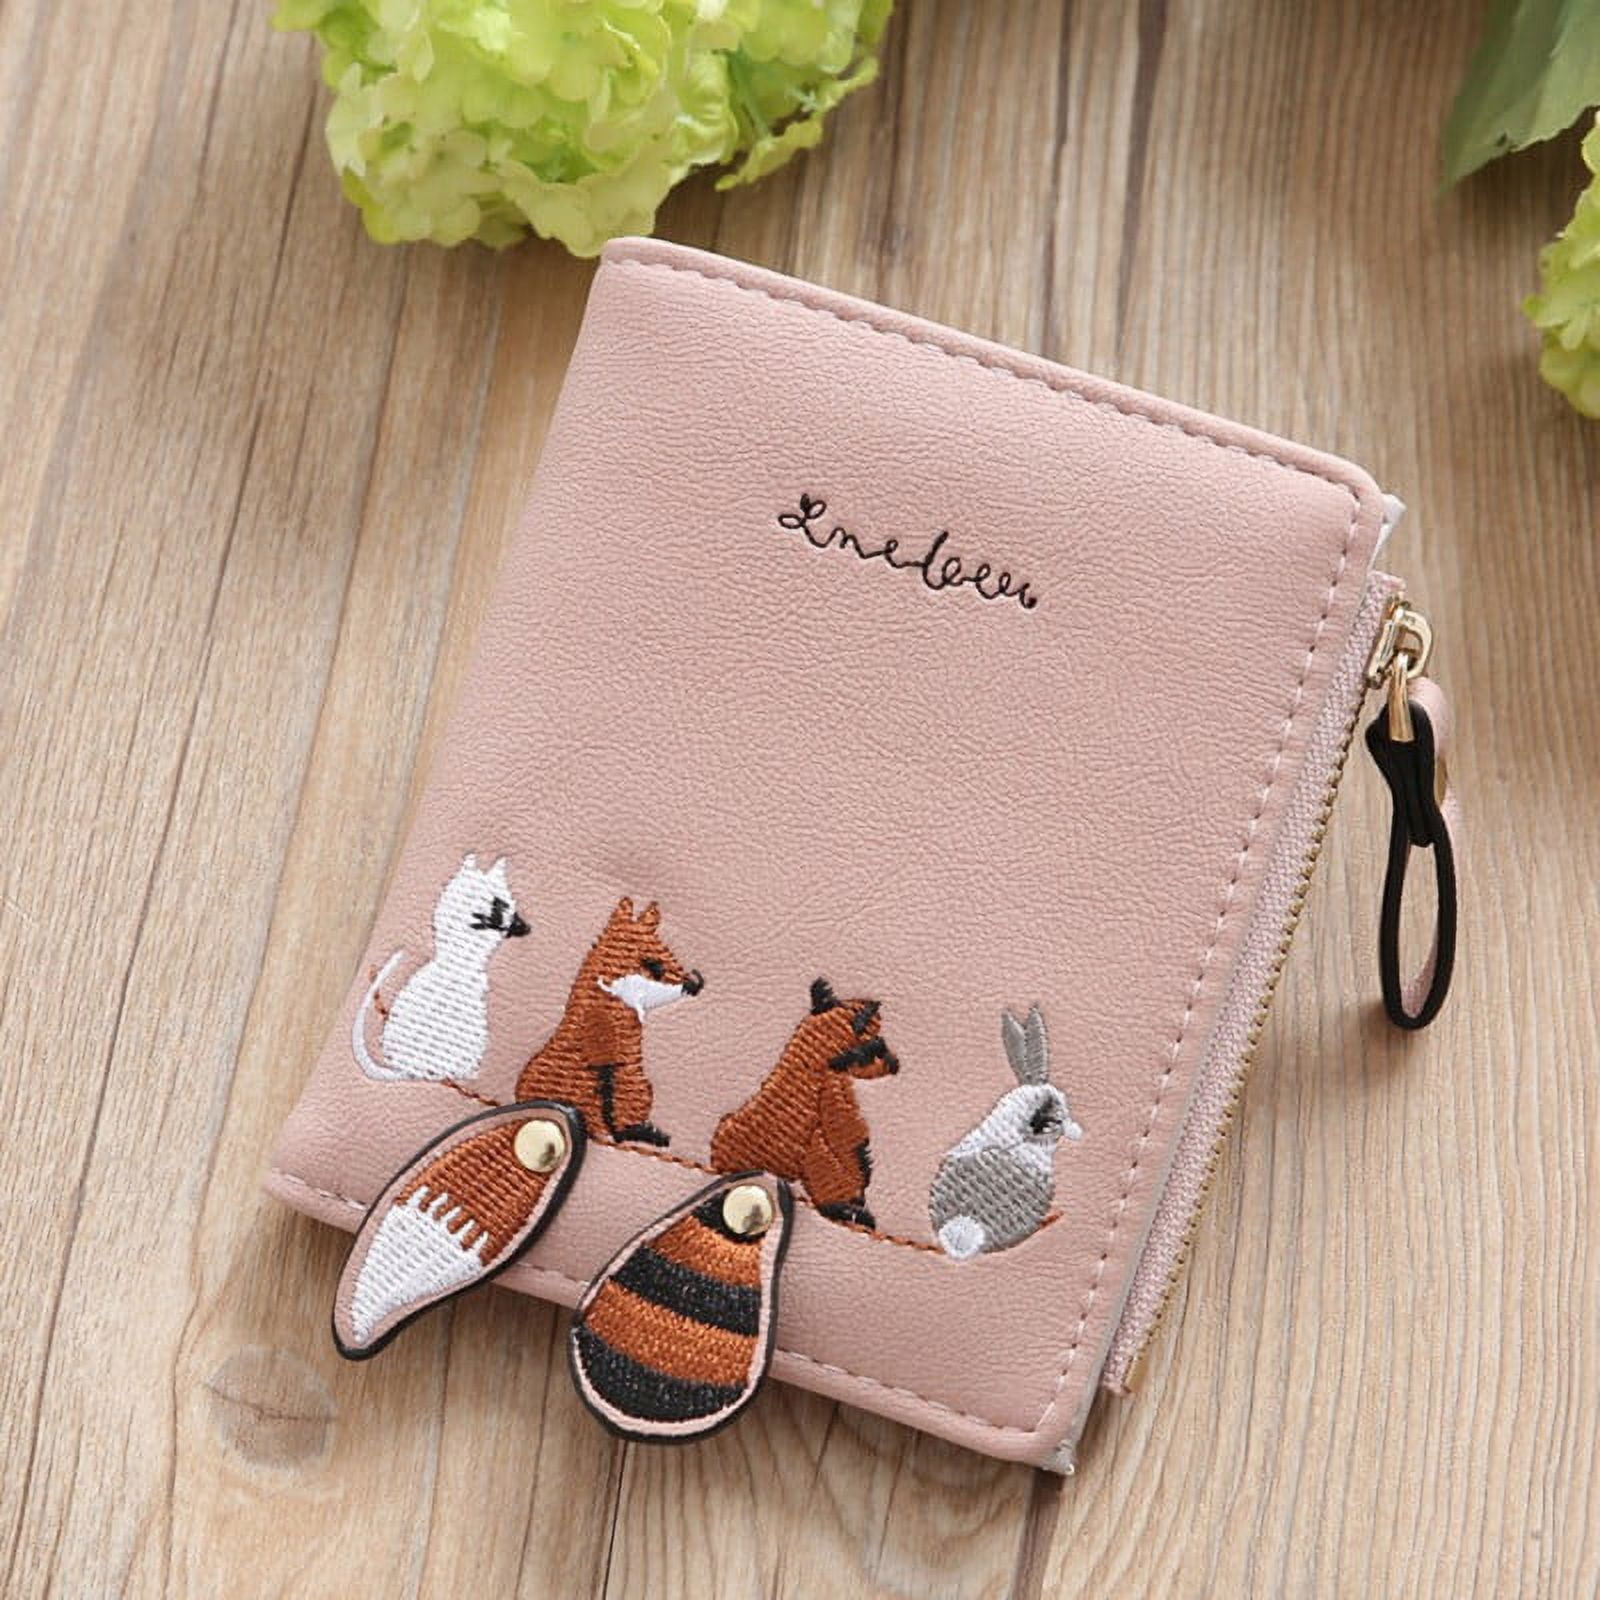  GPWDSN Ladies Small Wallet Women's Mini Wallet PU Leather Wallet  Coin Card Holder Lady's Pocket Small Purse (B,26x15x9cm) : Everything Else